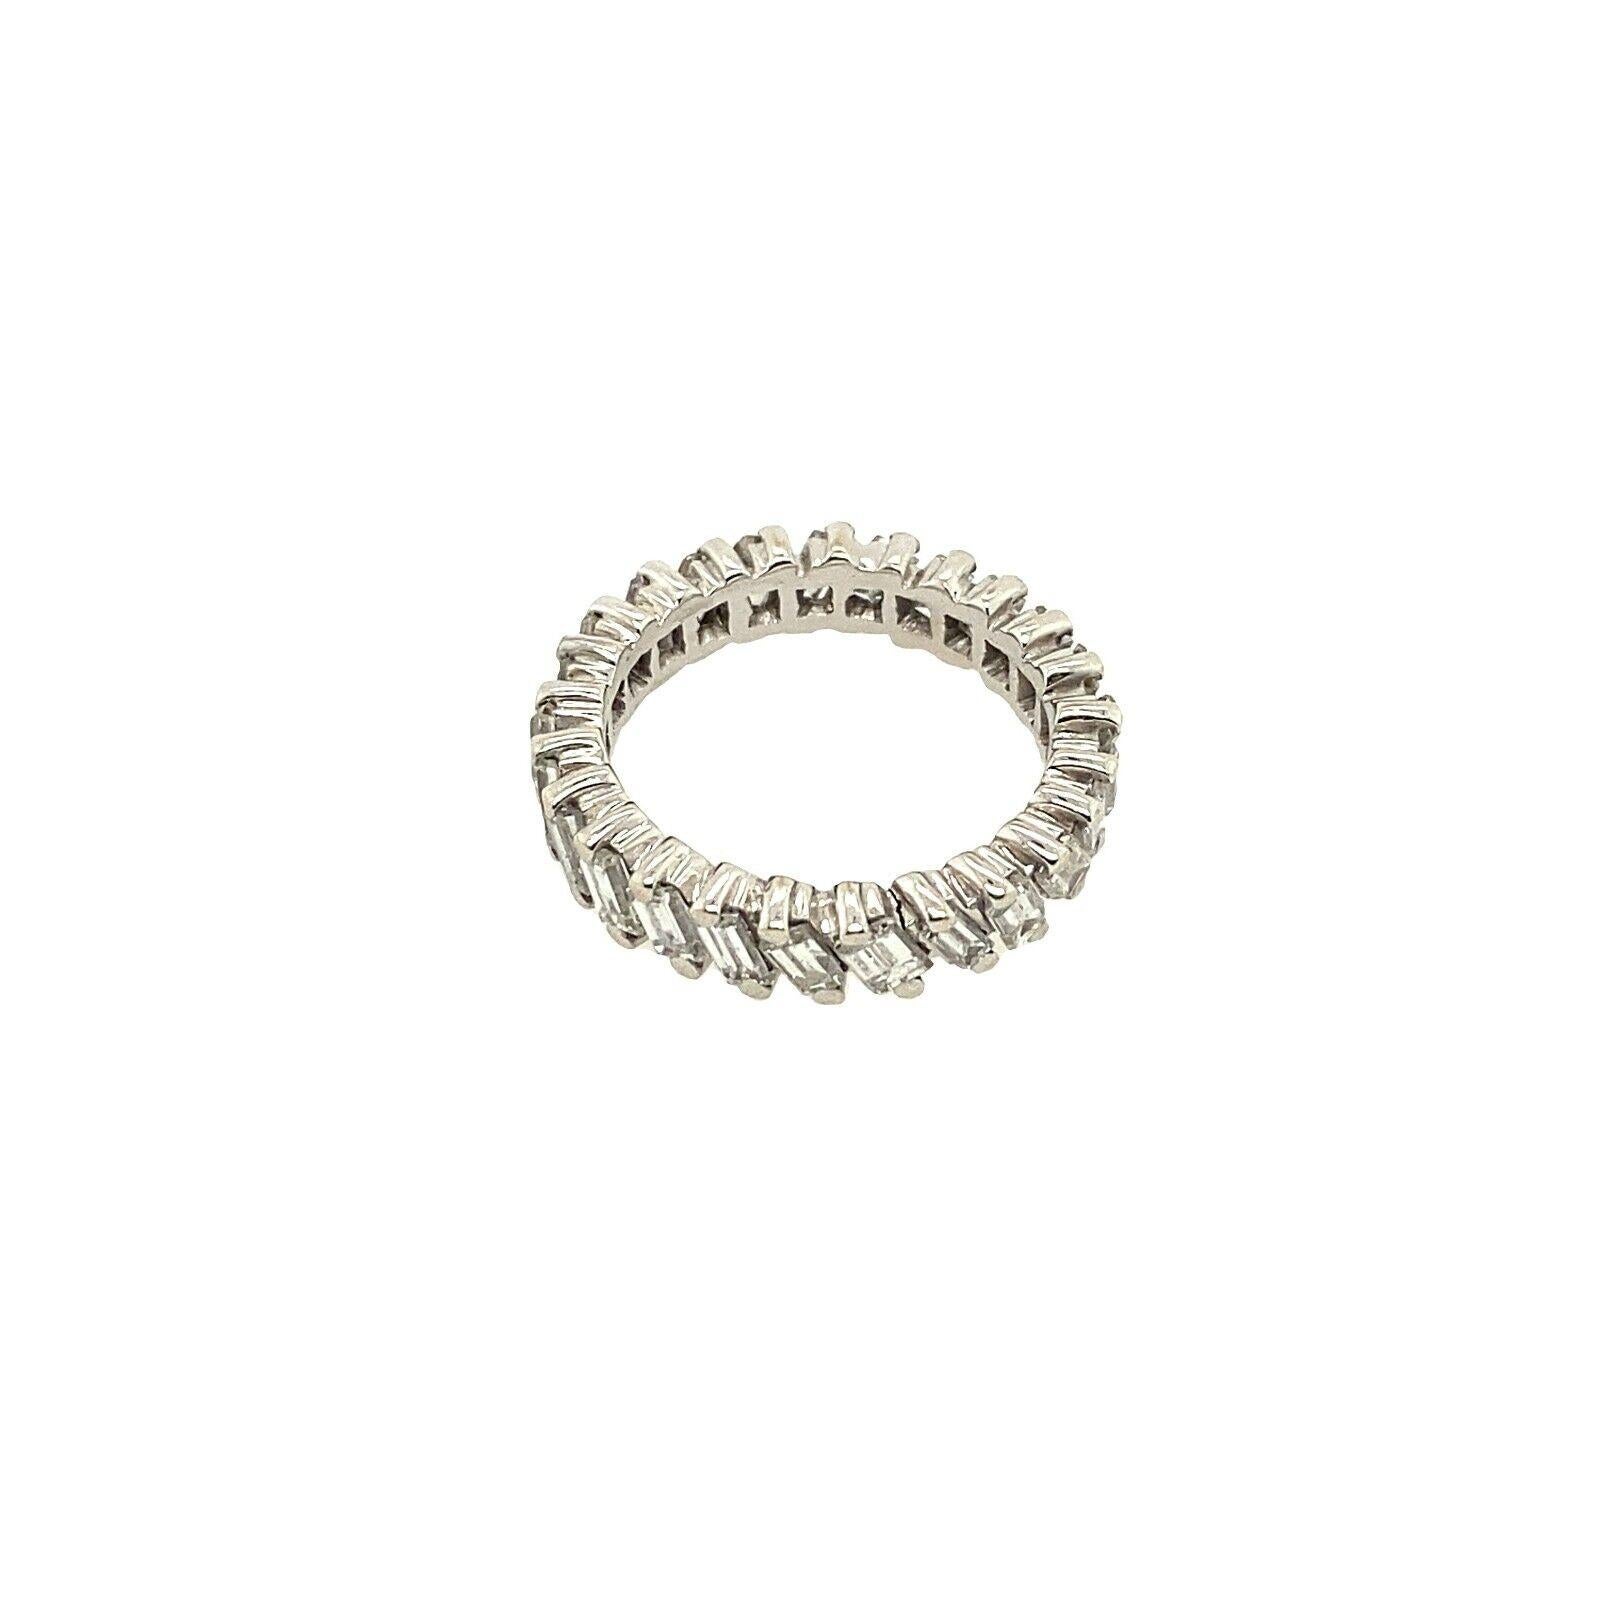 This vintage full eternity ring features 2.0ct of natural Baguette cut Diamonds in a stunning design, set in 18ct White Gold. 

Additional Information:
Total Diamond Weight: 2.0ct
Diamond Colour: H
Diamond Clarity: SI
Width of Band: 4.4mm
Width of